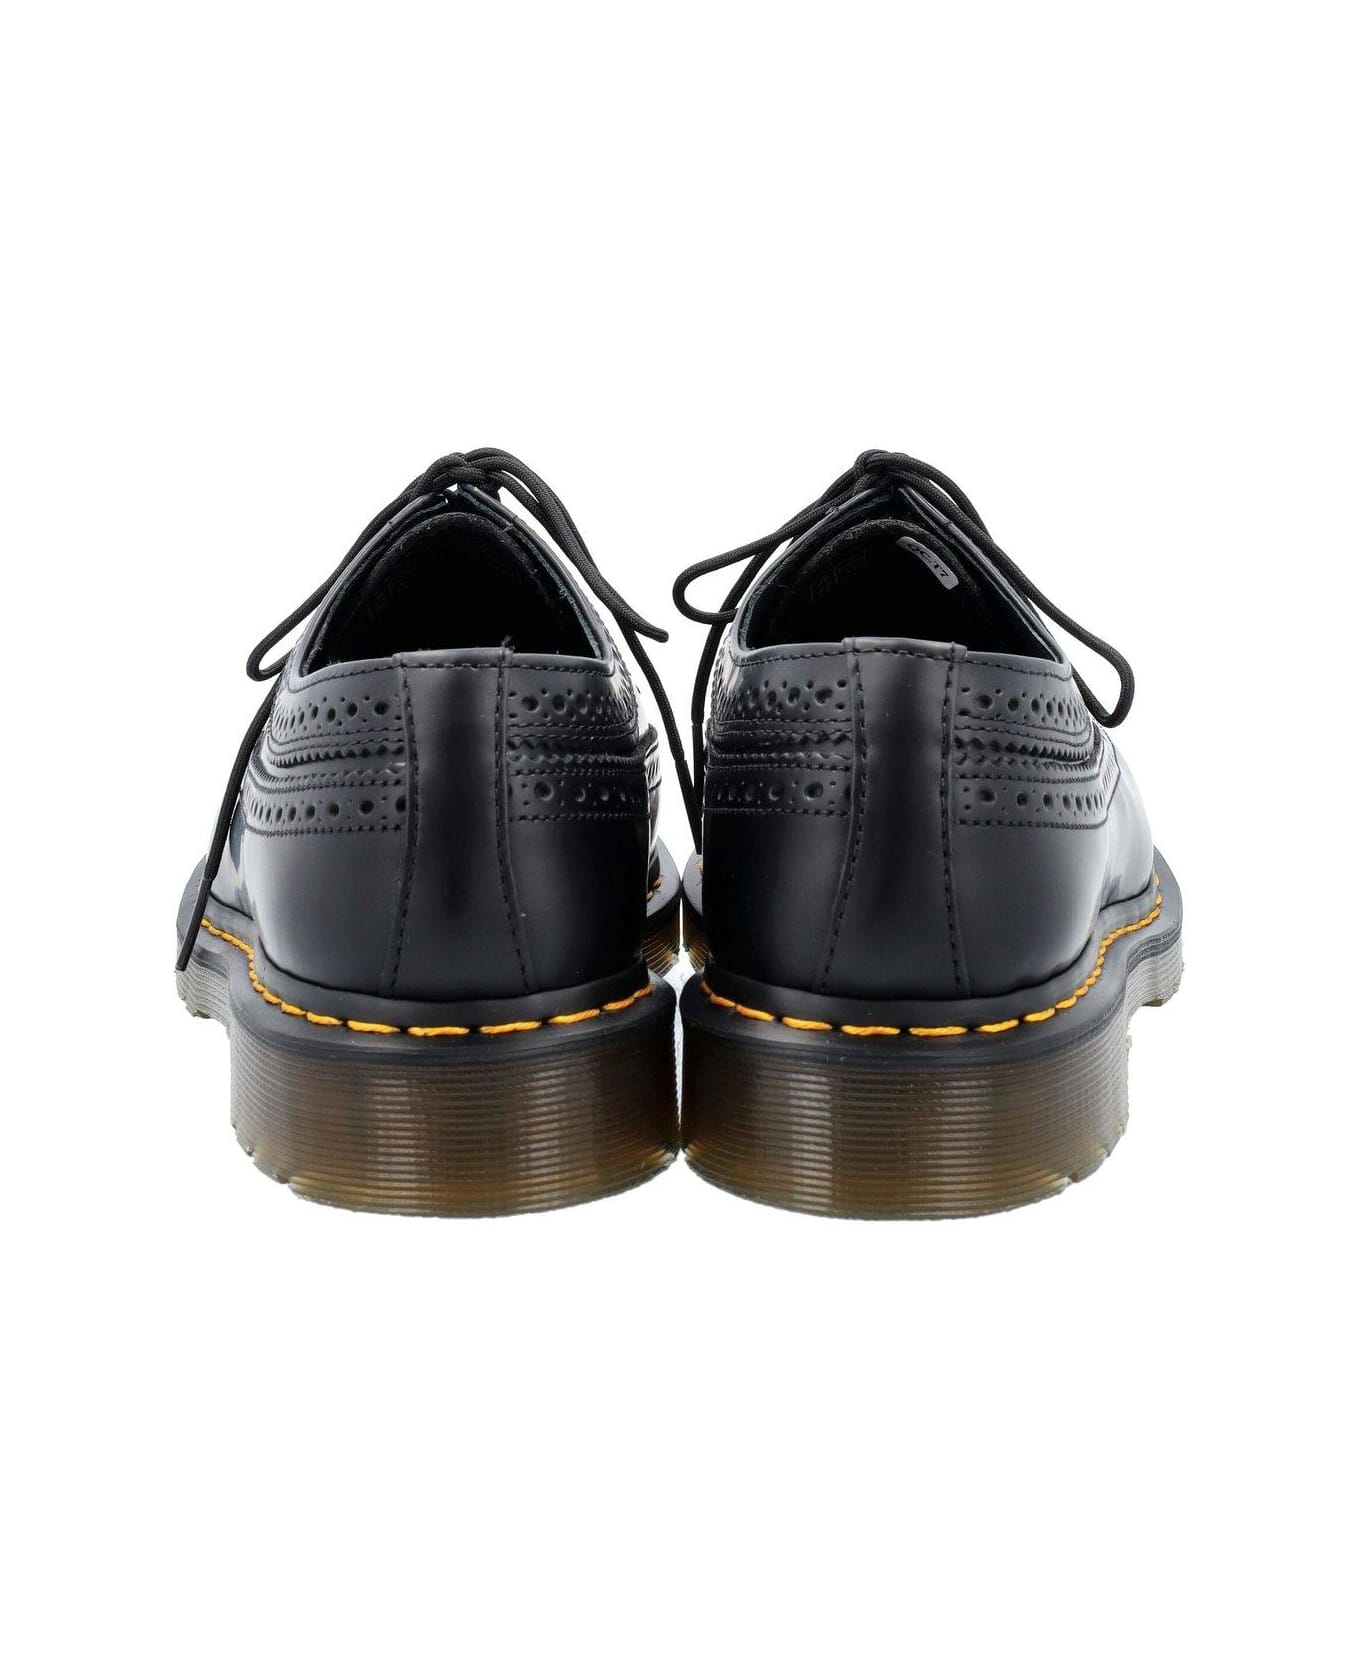 Dr. Martens 3989 Lace-up Brogue Shoes - black ローファー＆デッキシューズ